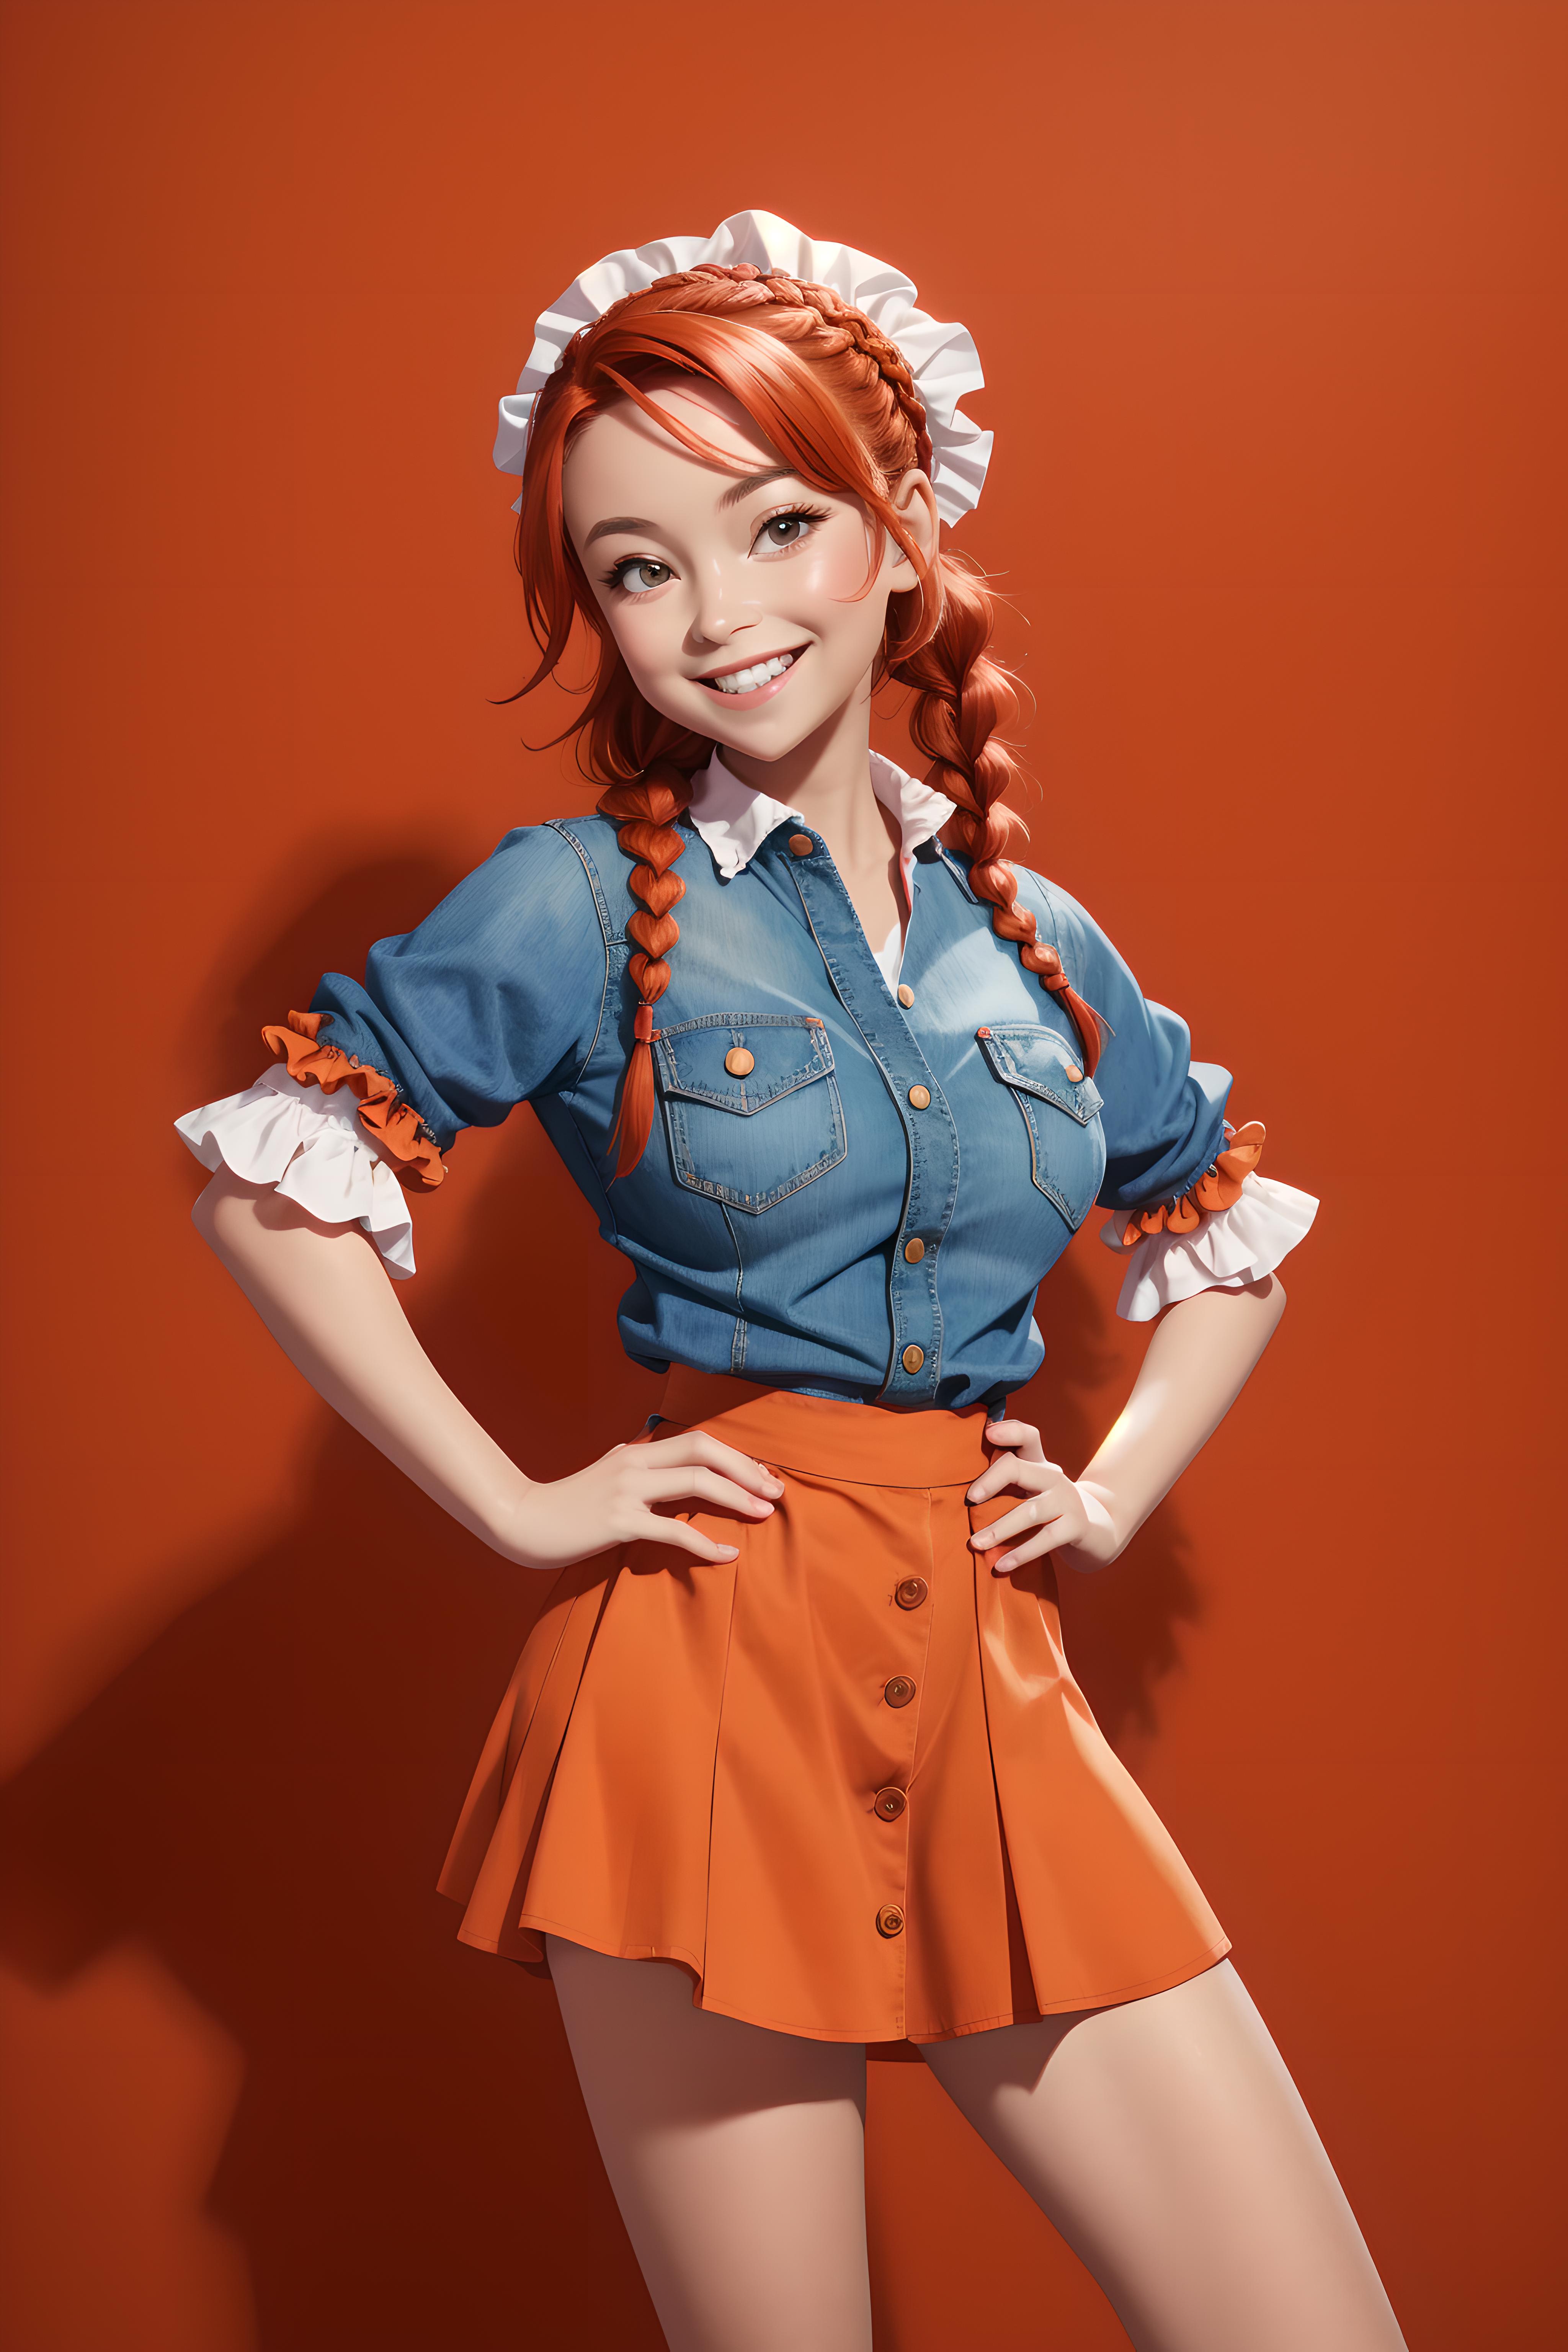 Cartoon Anime Character Wearing A Blue Shirt, Skirt, And Bow Ribbons.